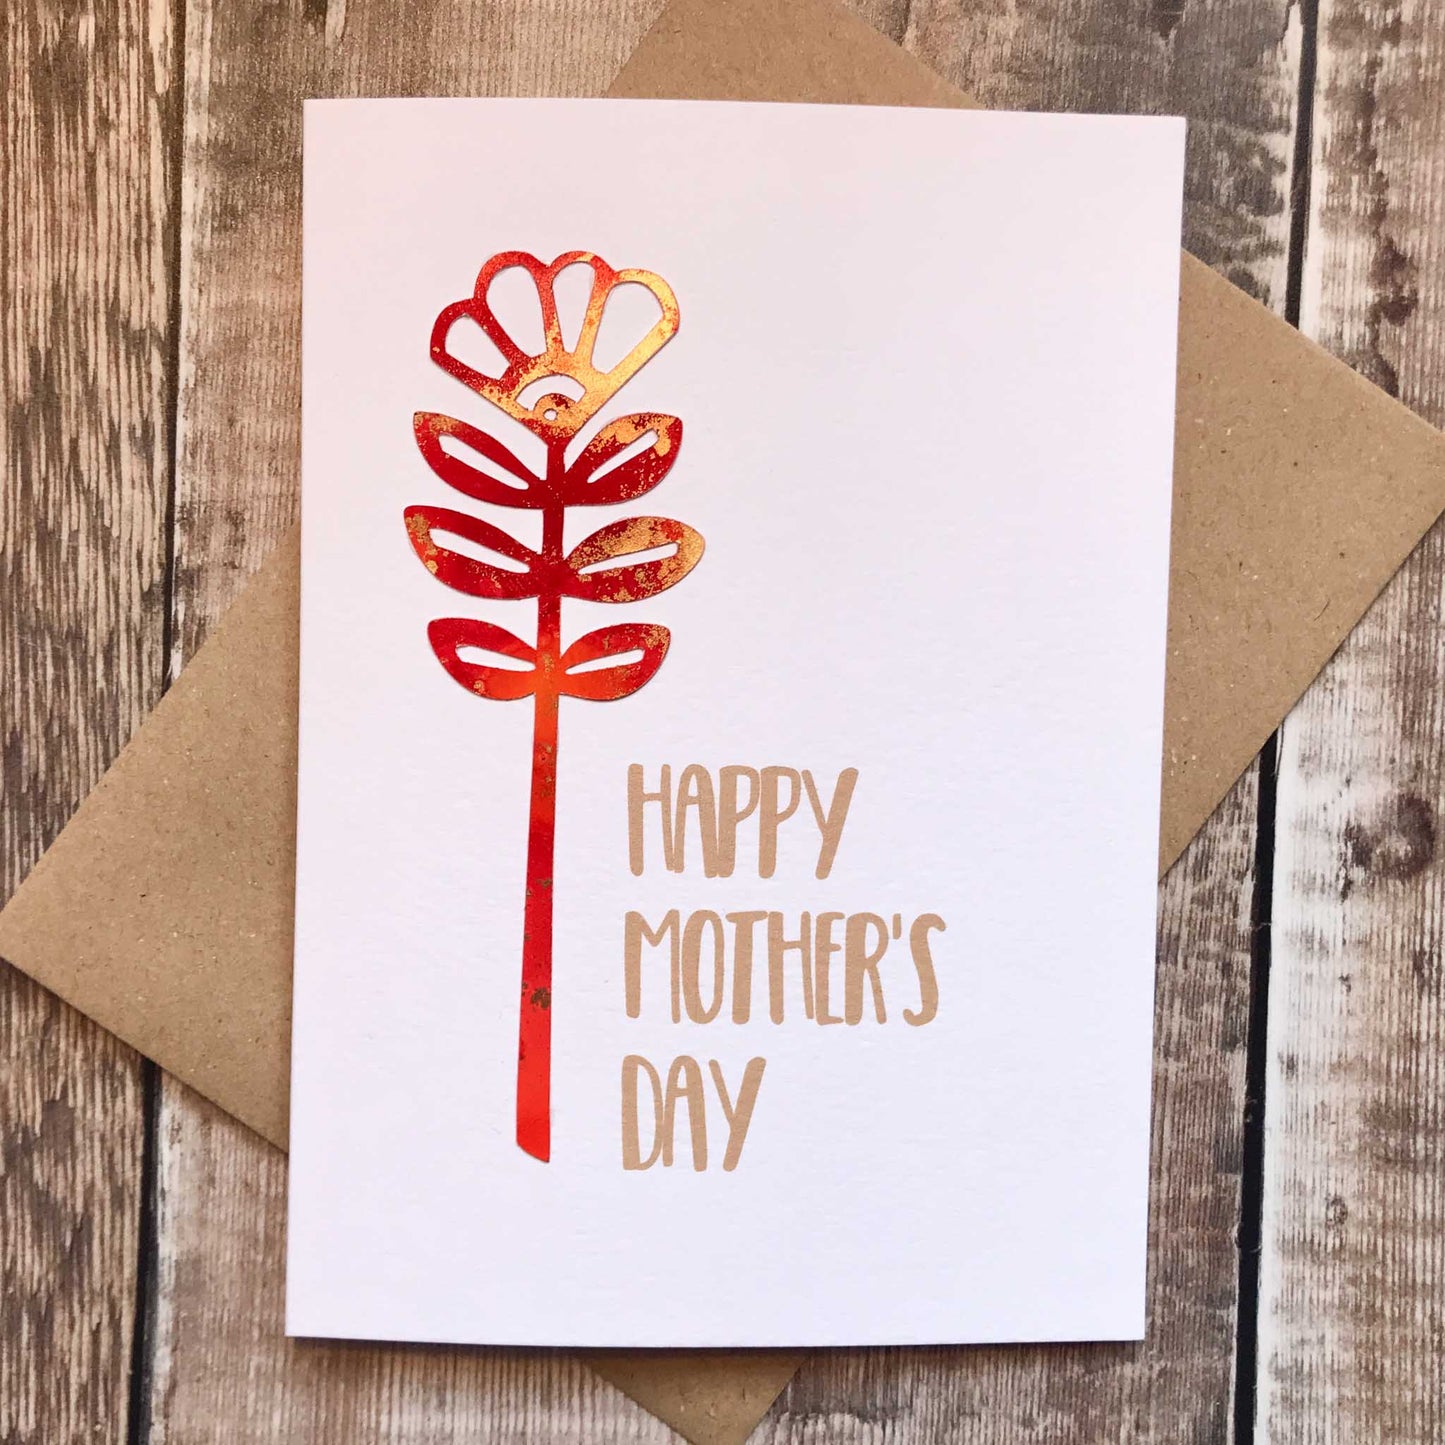 Scandi - Floral Style Mother's Day Card